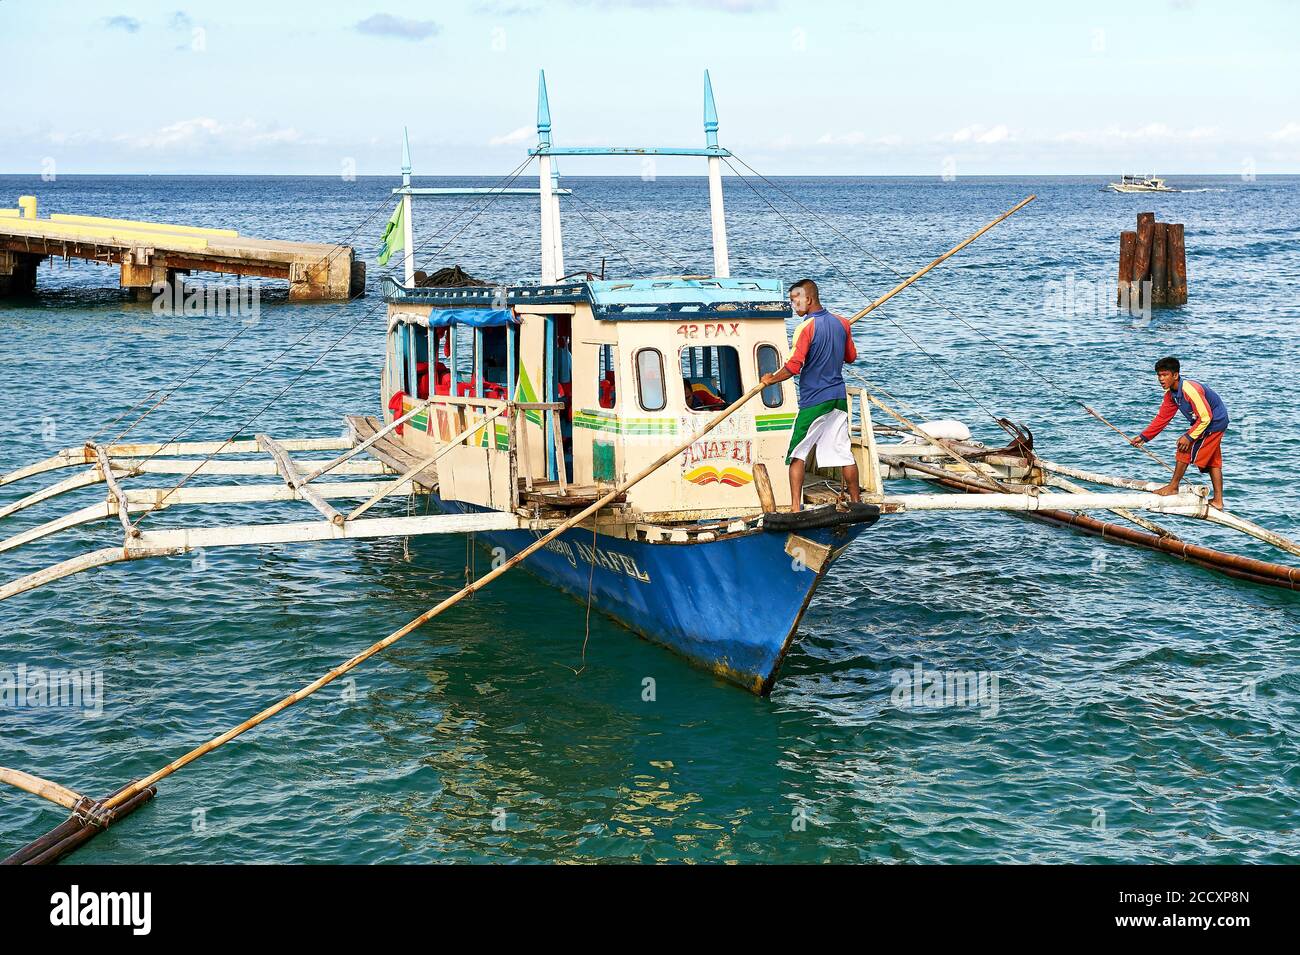 Caticlan pier, Aklan, Philippines: Typical outrigger boat with boatmen arriving at the port of Caticlan, the gateway to Boracay Stock Photo